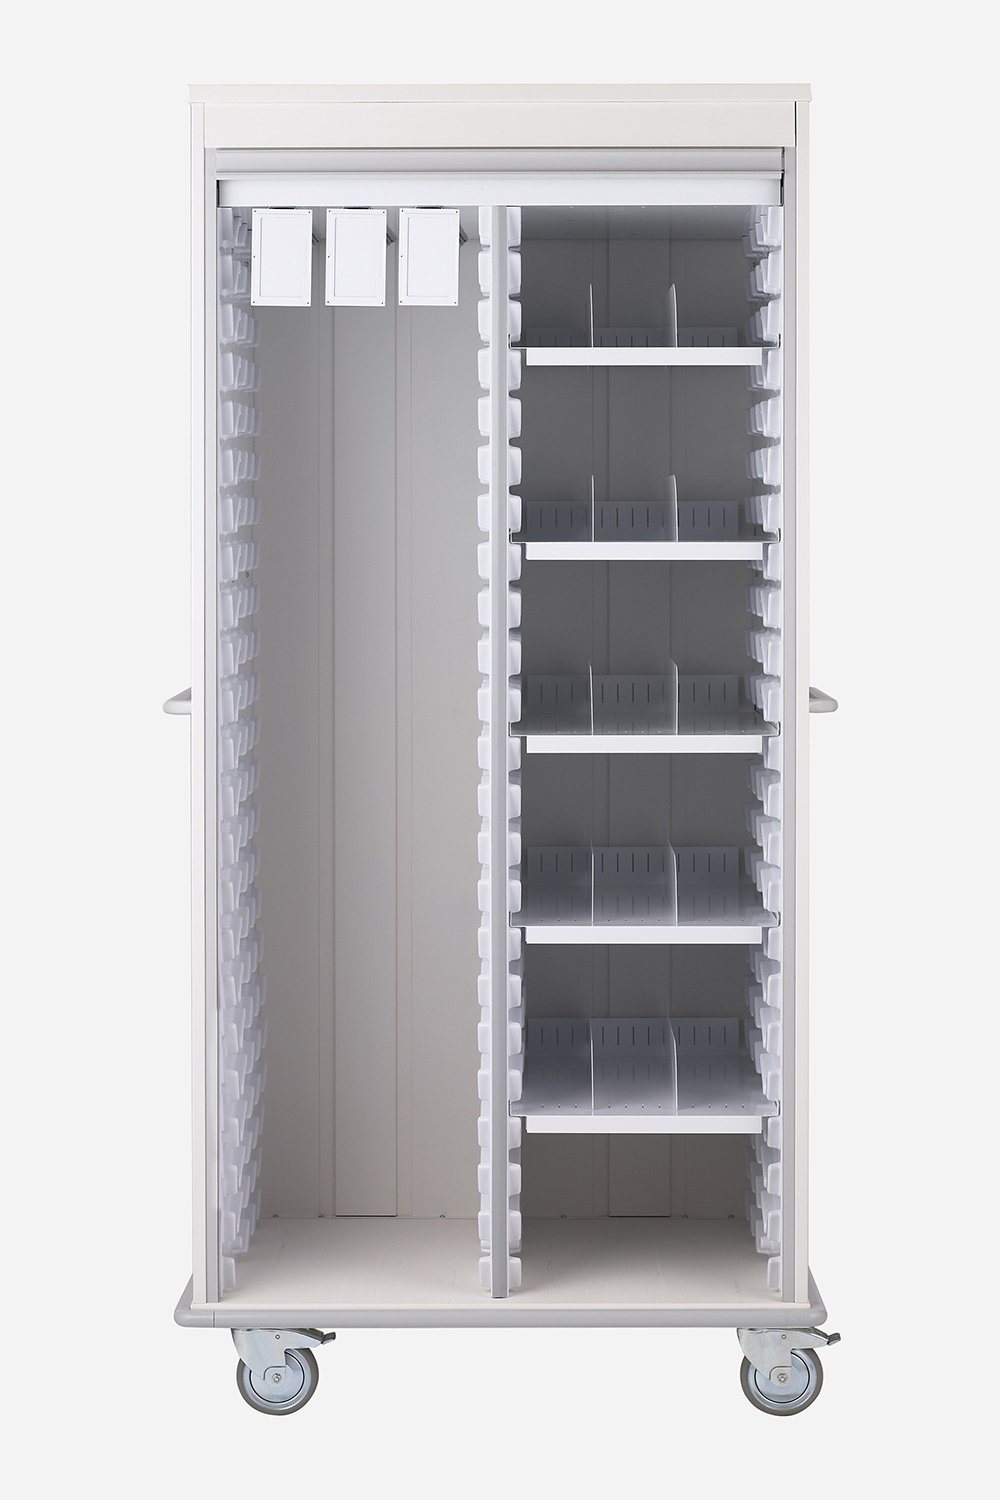 Tall Double Enclosed Storage Acart 5 Shelves 20 Dividers Tambour 28" X 40" X 81" O.D. | 24" X 33" X 65" I.D.